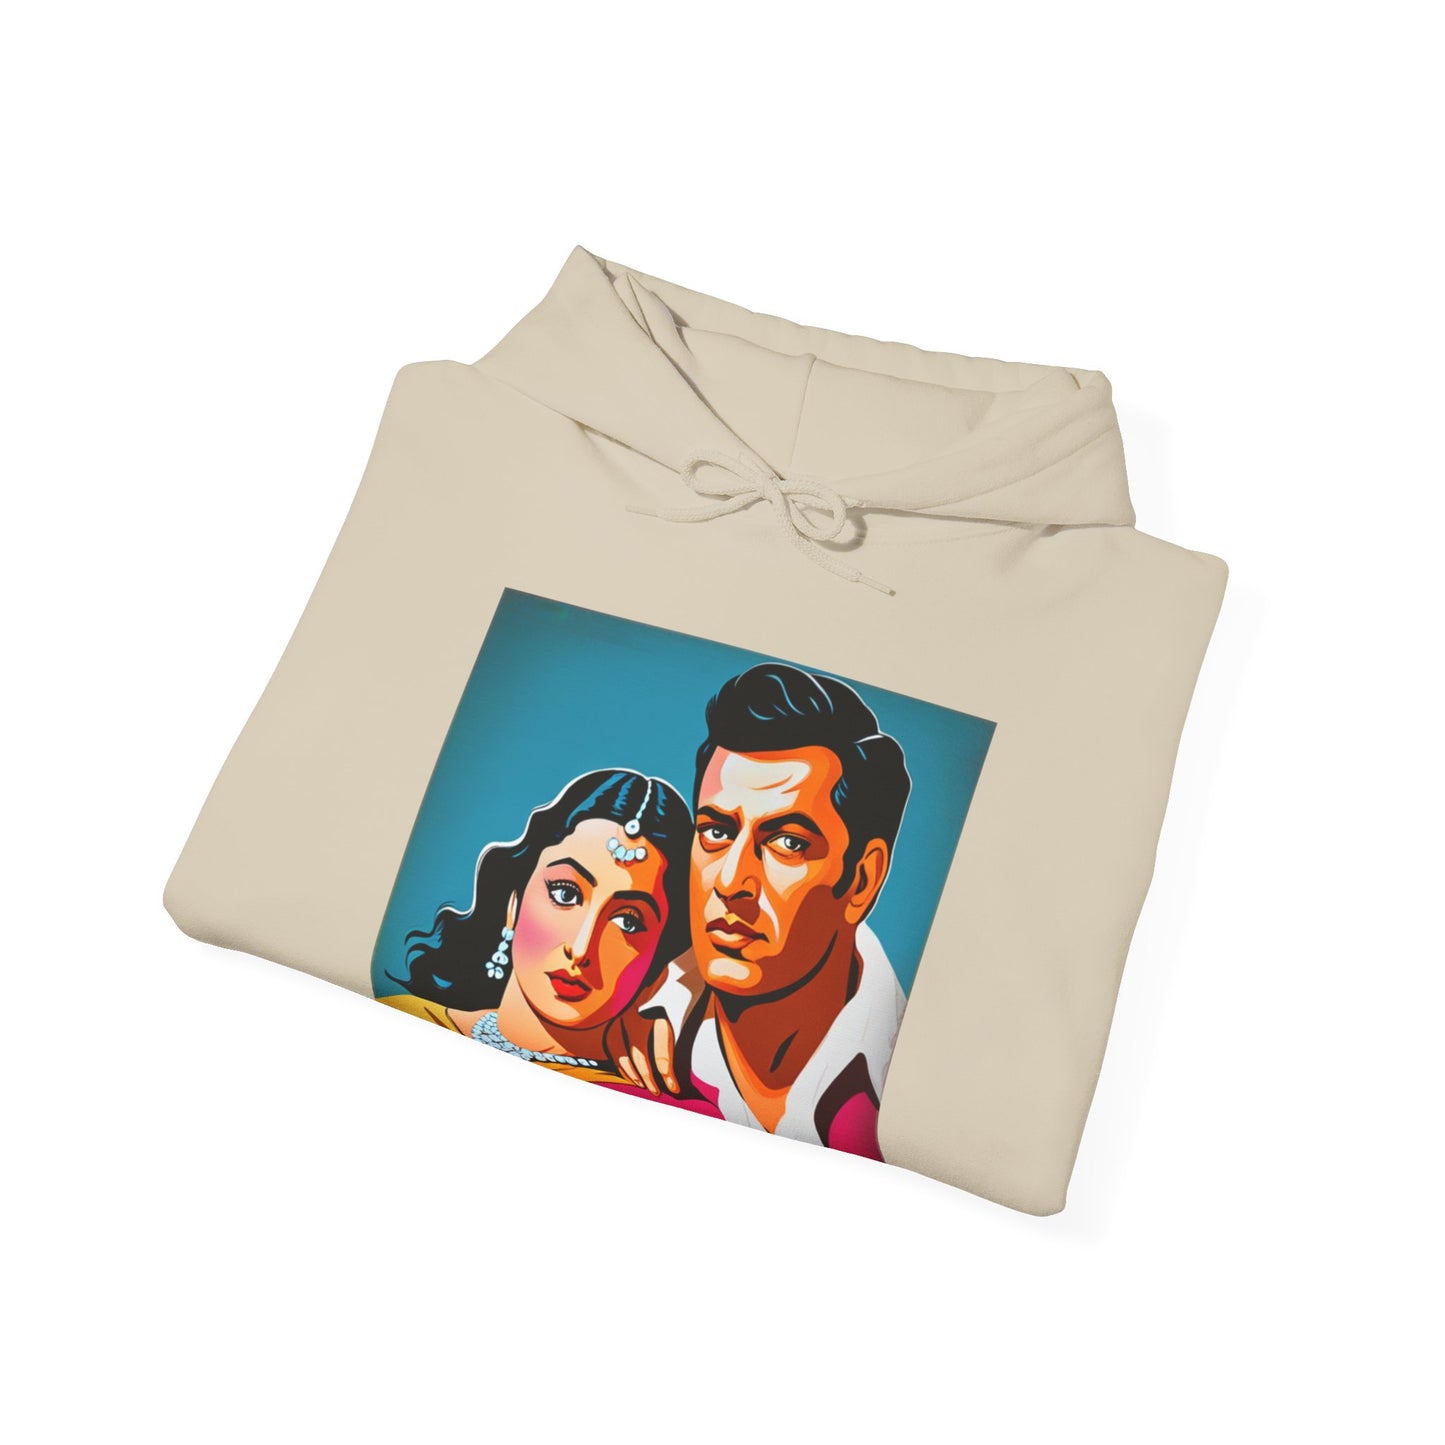 AI Generated Bollywood Graphic Hoodie